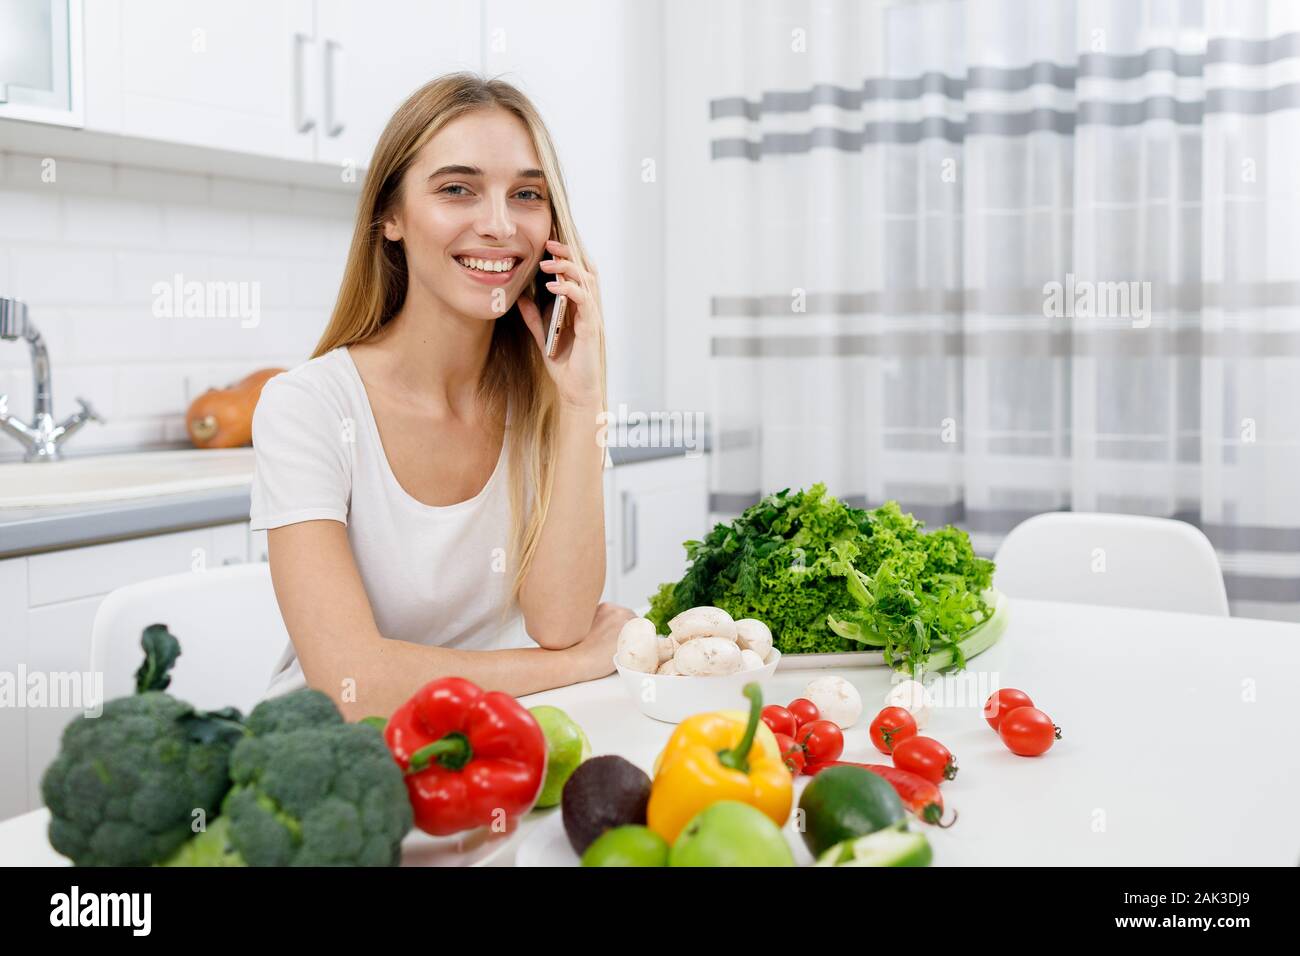 Young Housewife Exchanging Cooking Recipes via Smartphone Stock Photo